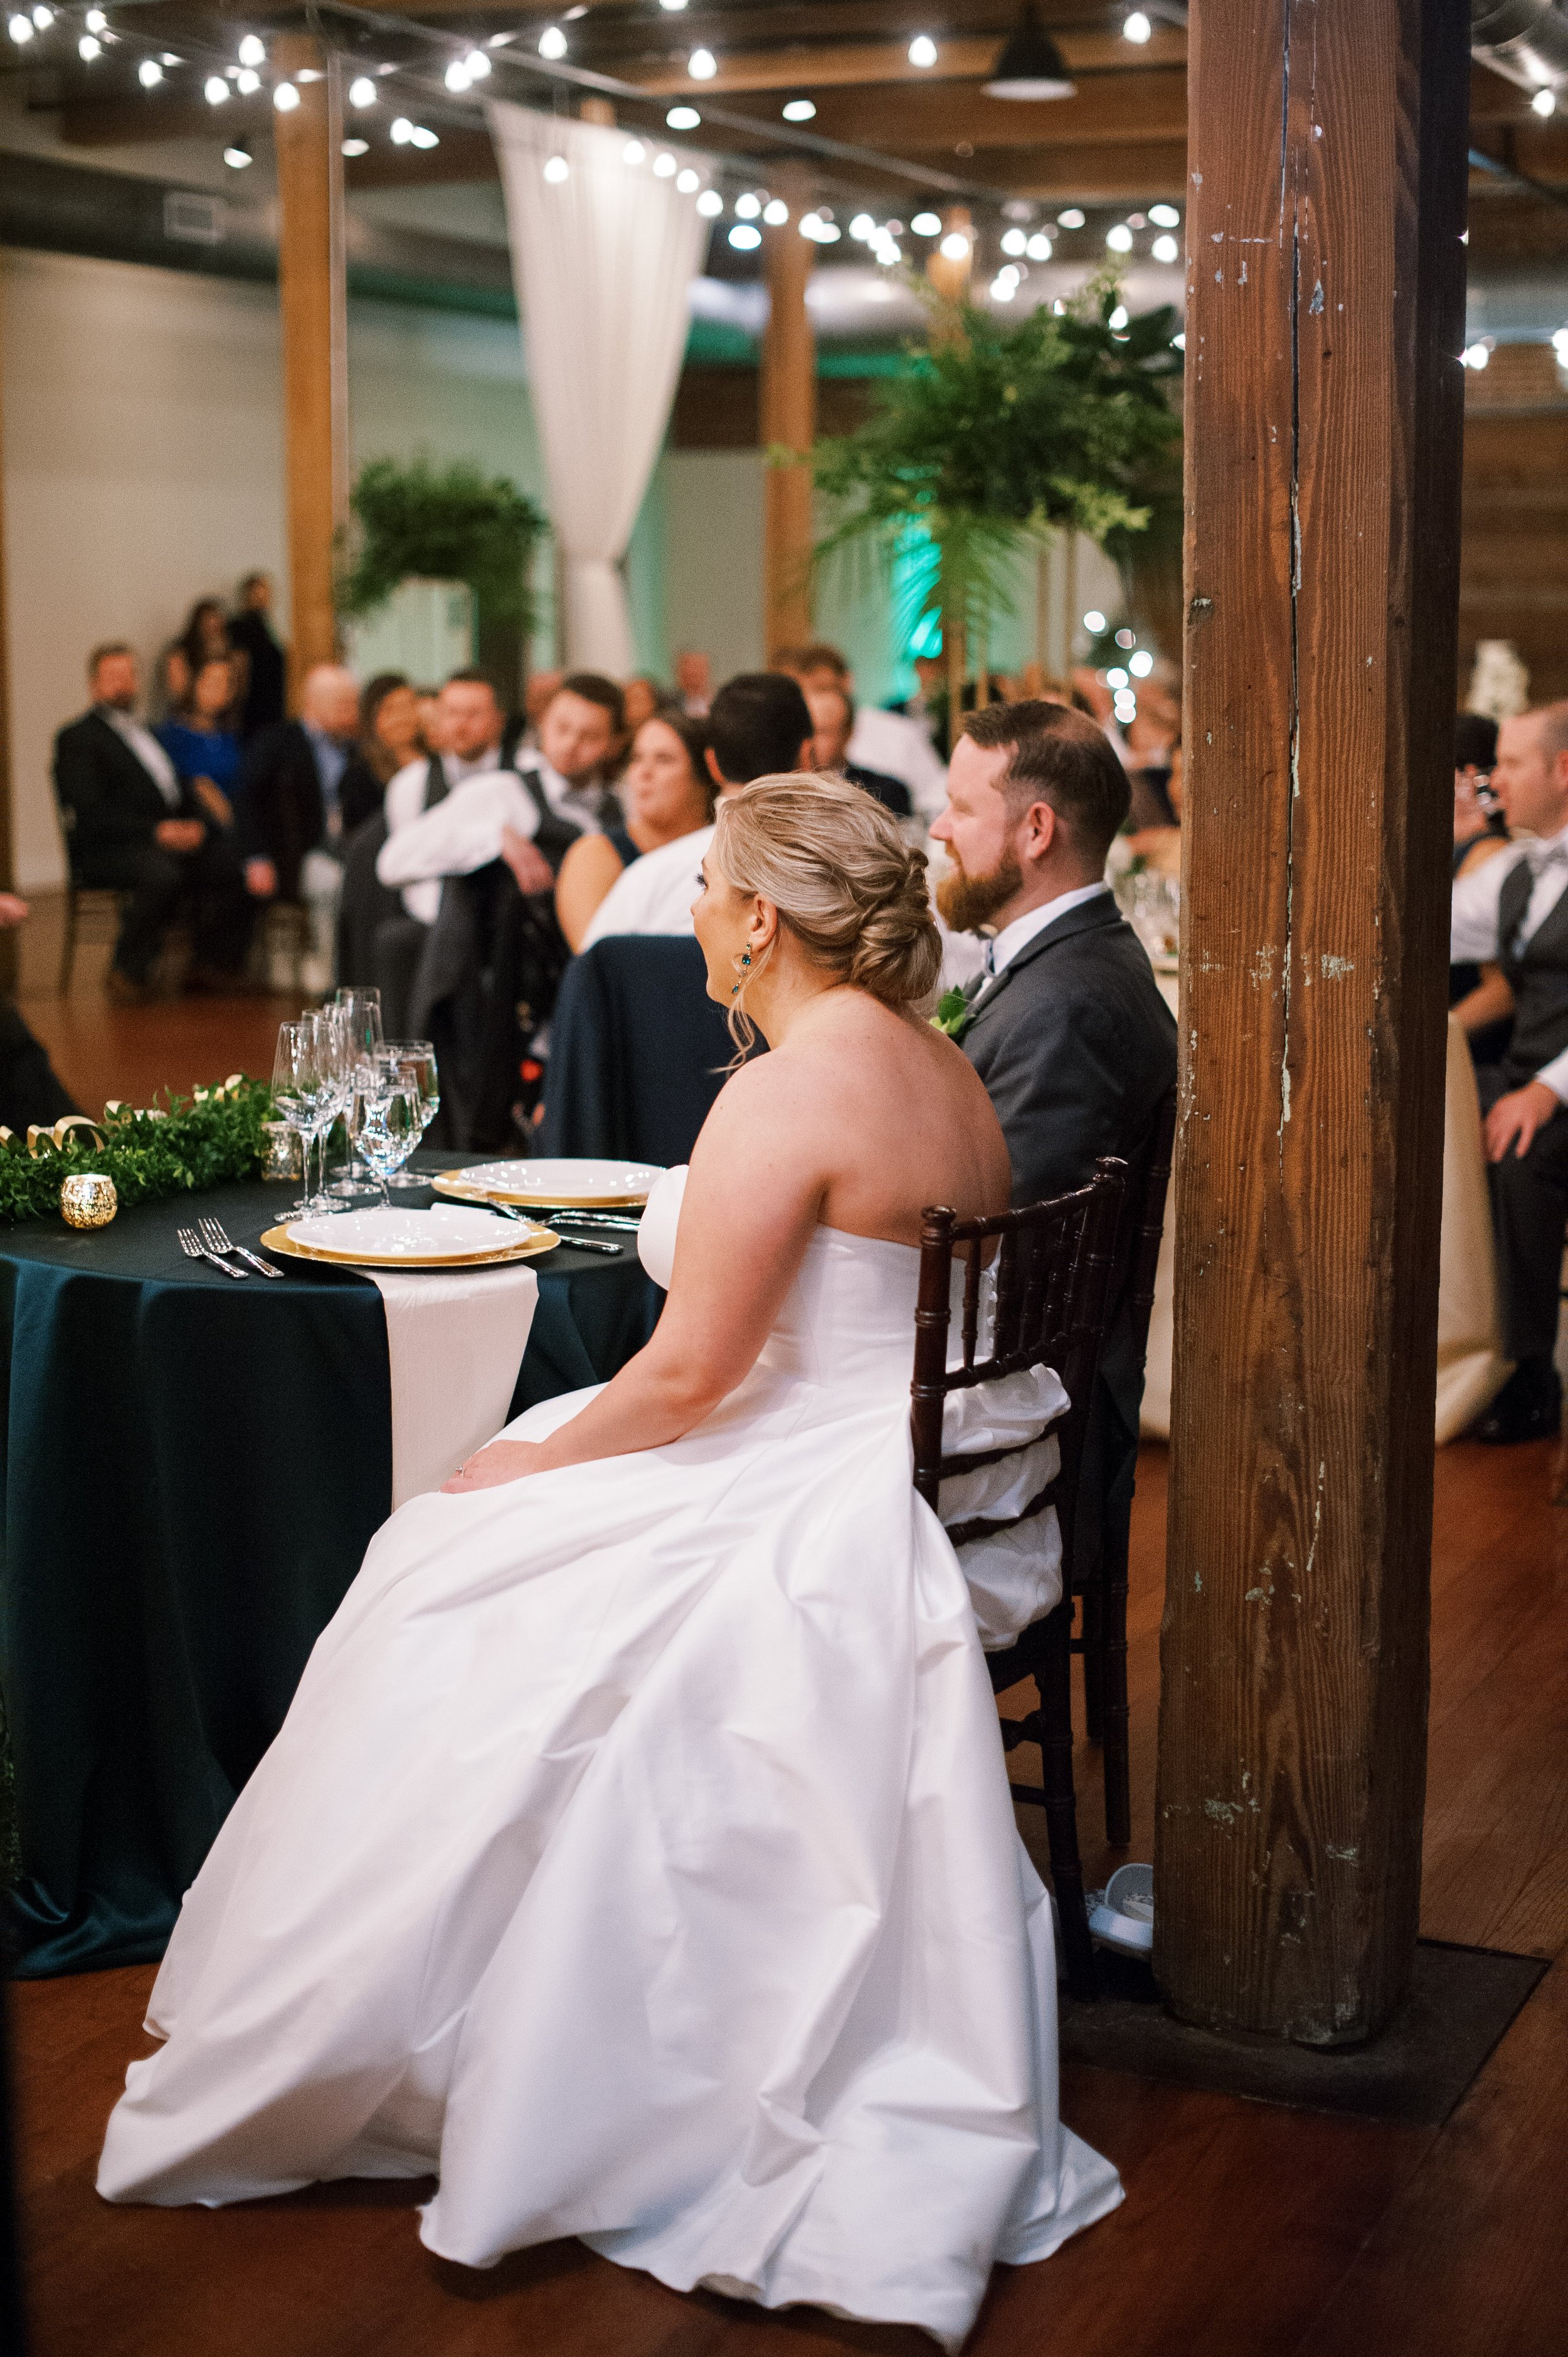 Sweetheart Table Sitting Wedding at The Cloth Mill at Eno River&nbsp;Fancy This Photography